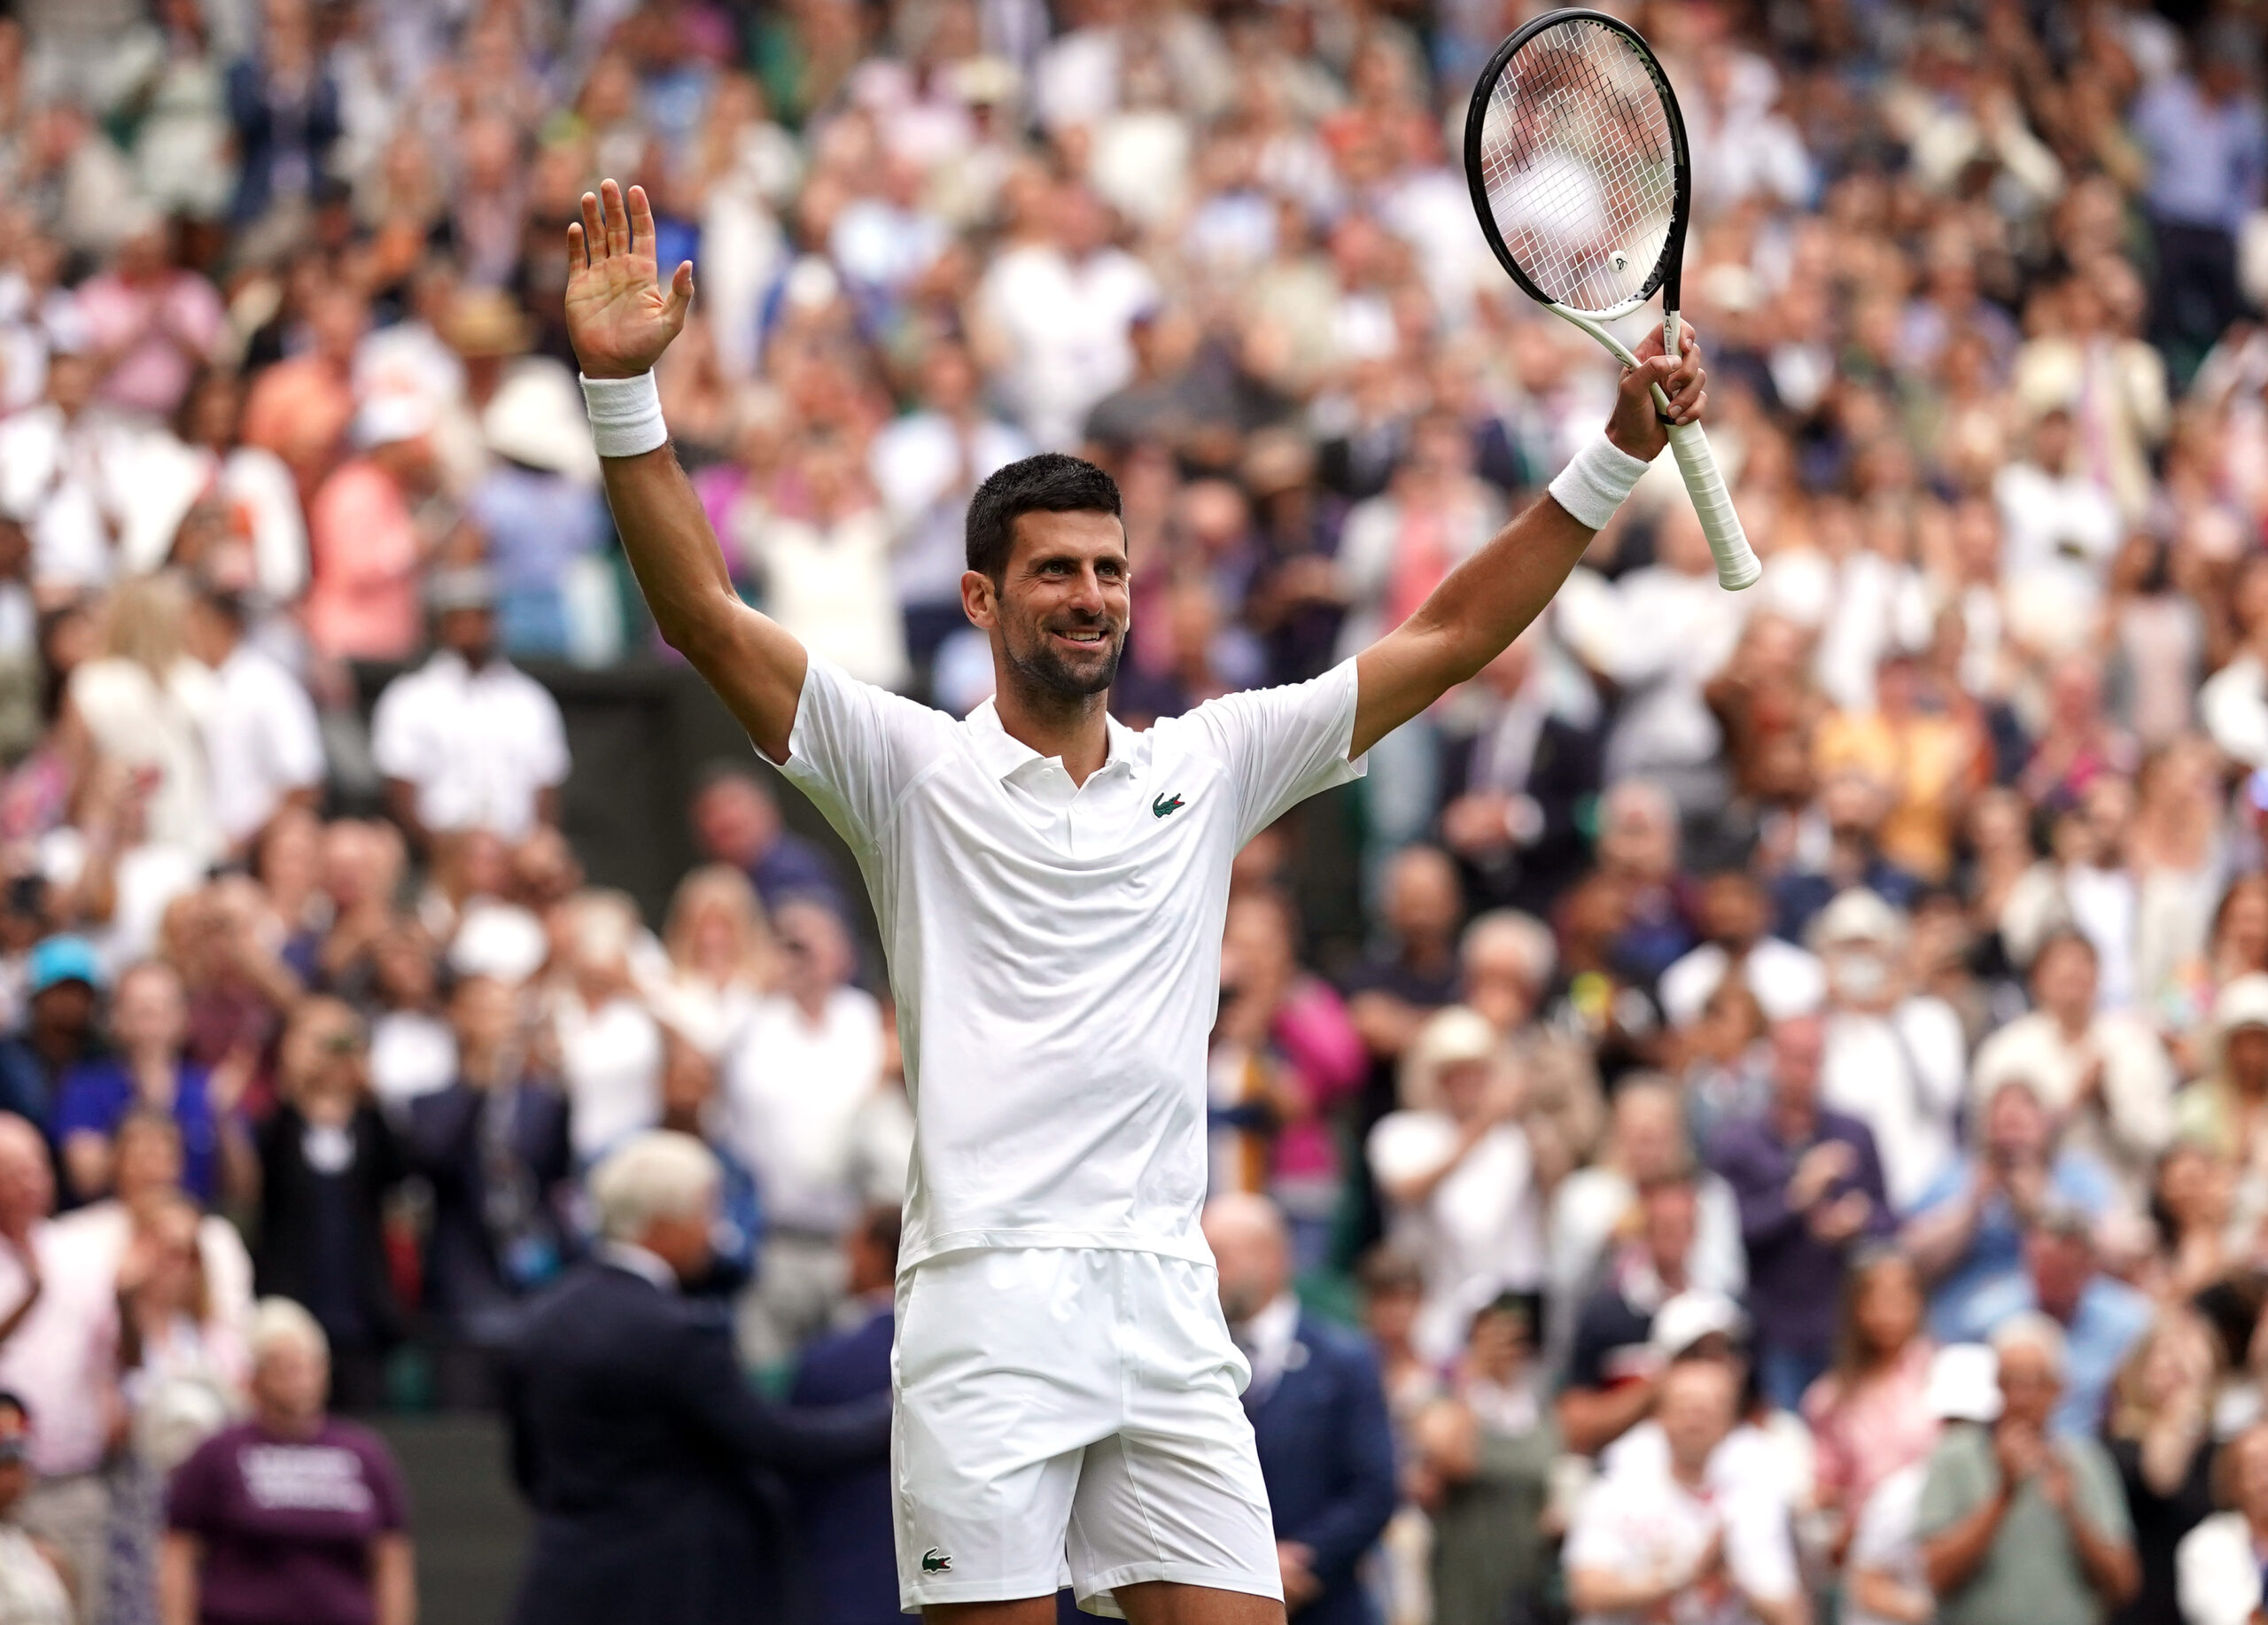 Djokovic roars into semi-finals – and has still not lost on Centre Court for 10 years